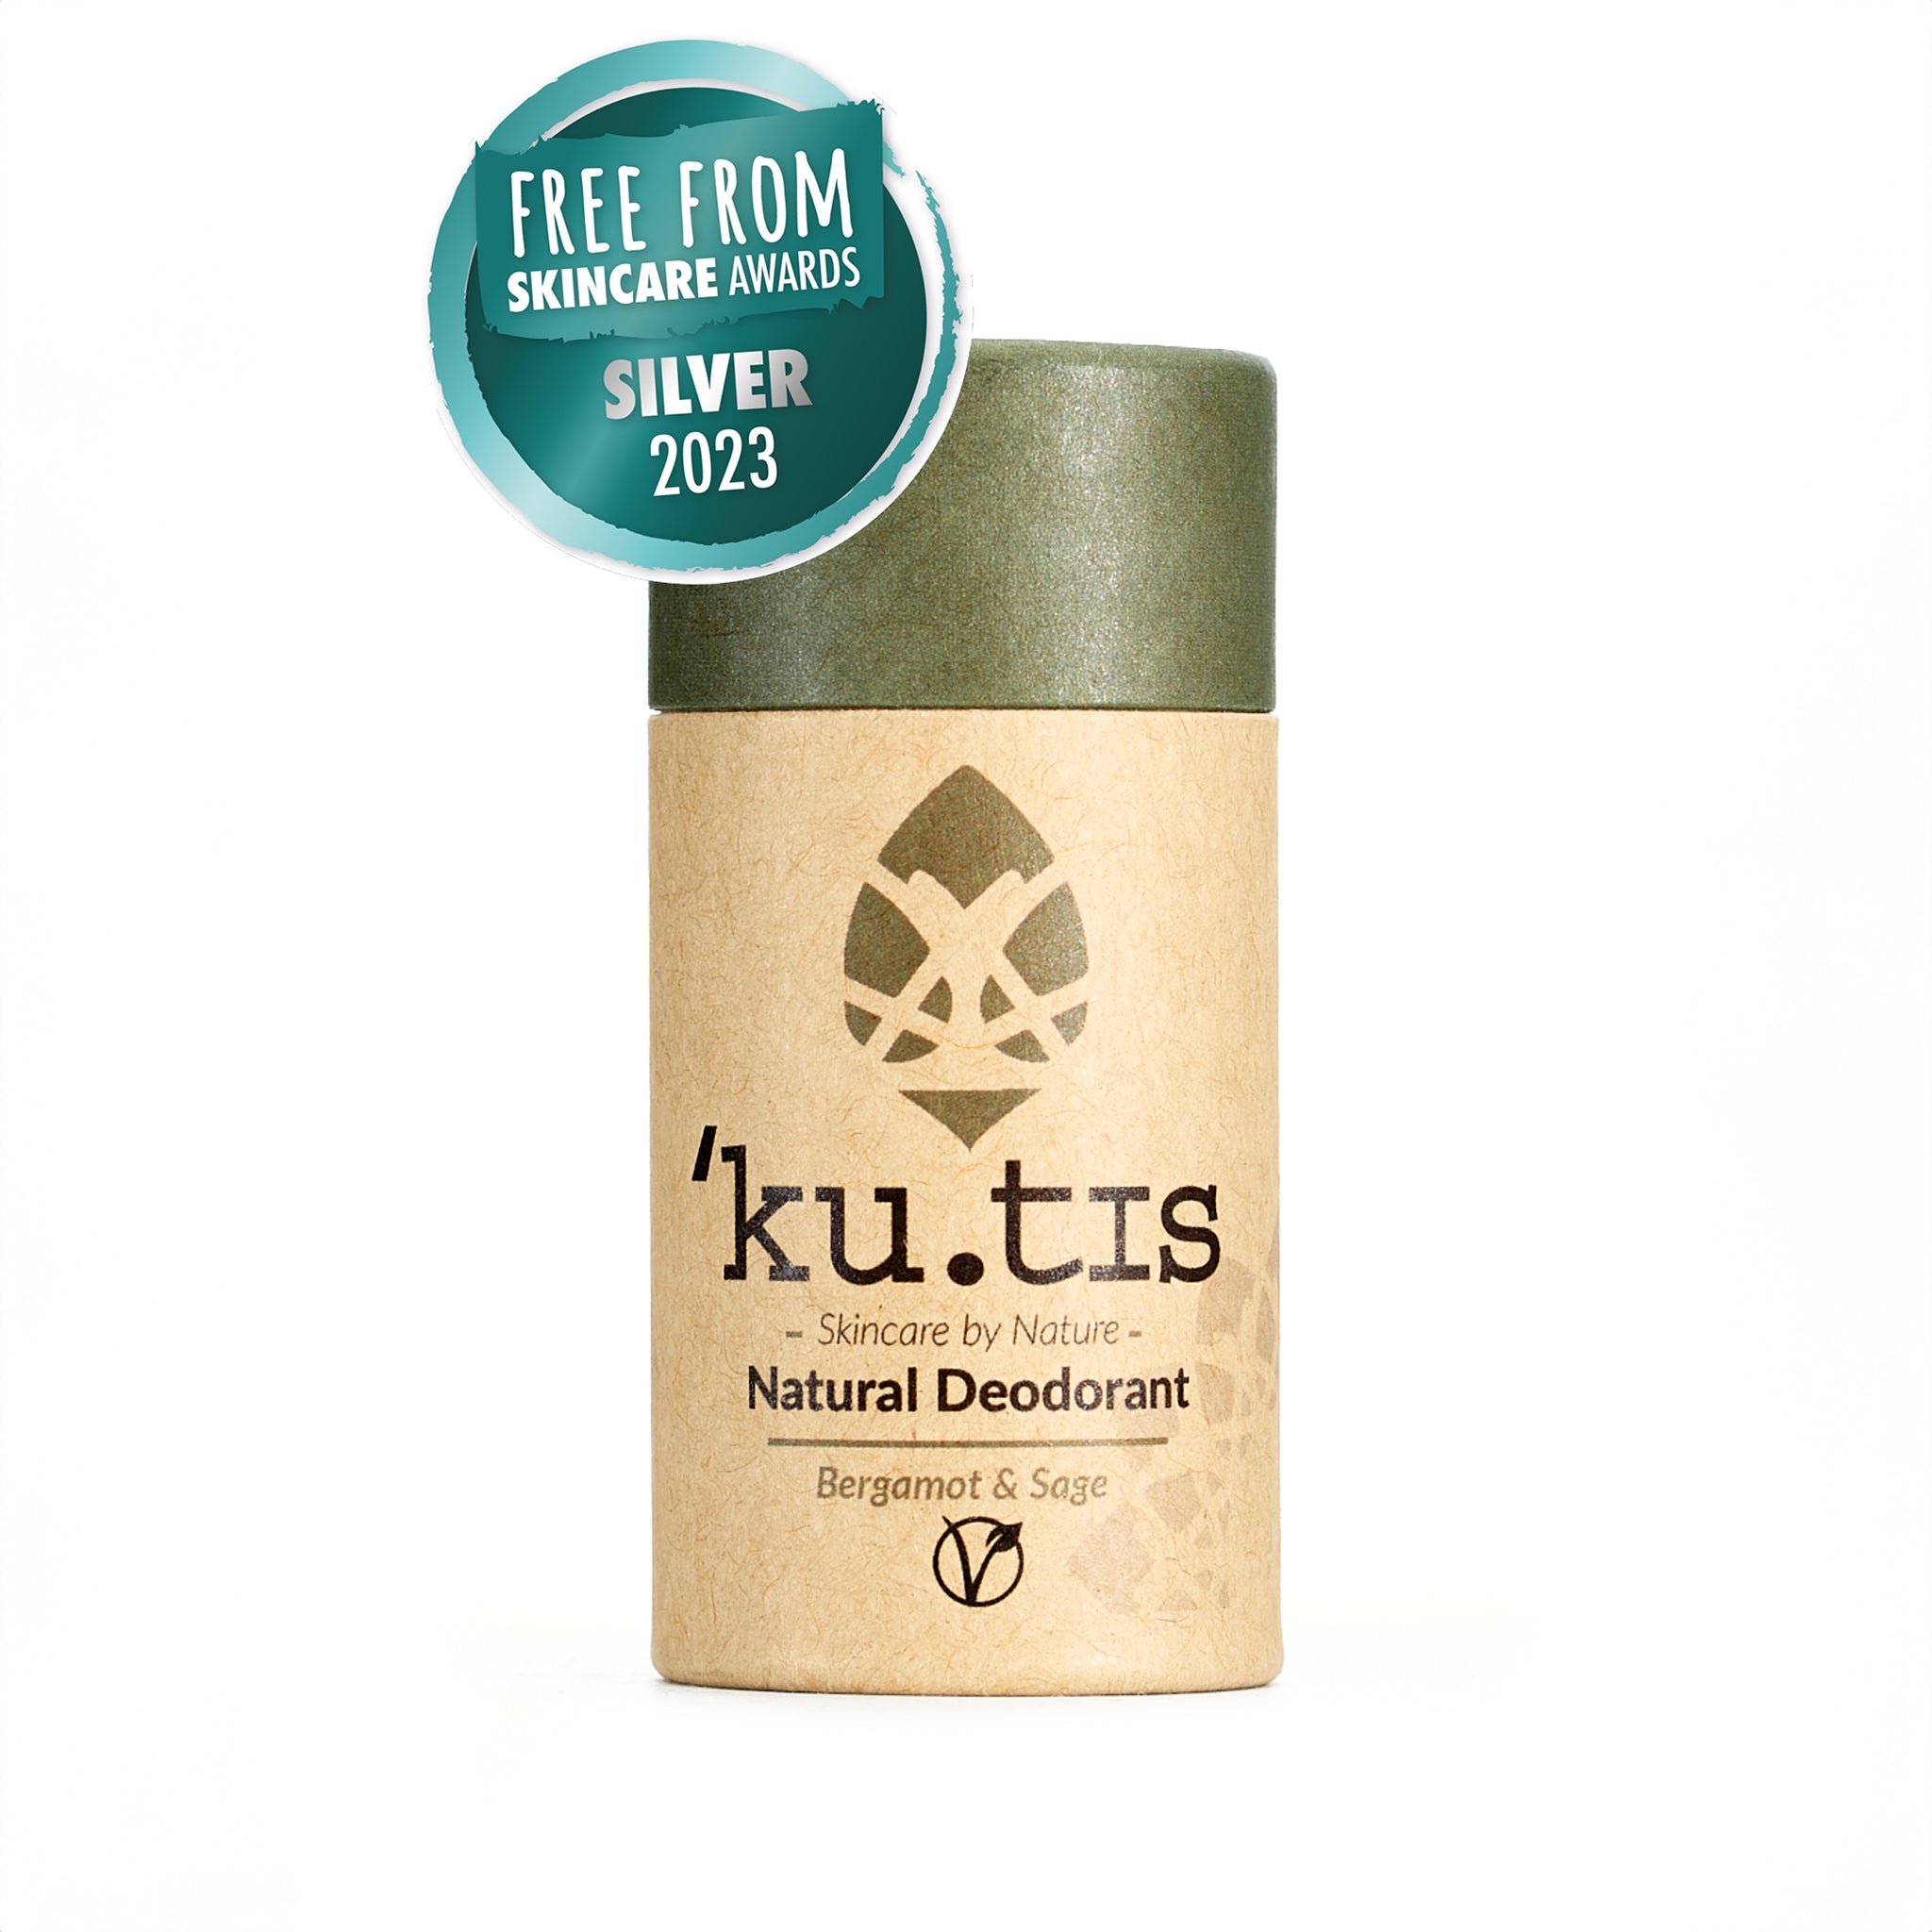 Natural bergamot and sage vegan deodorant stick packaged in an eco friendly cardboard push up tube. Award badge over image reads free from skincare awards silver 2023